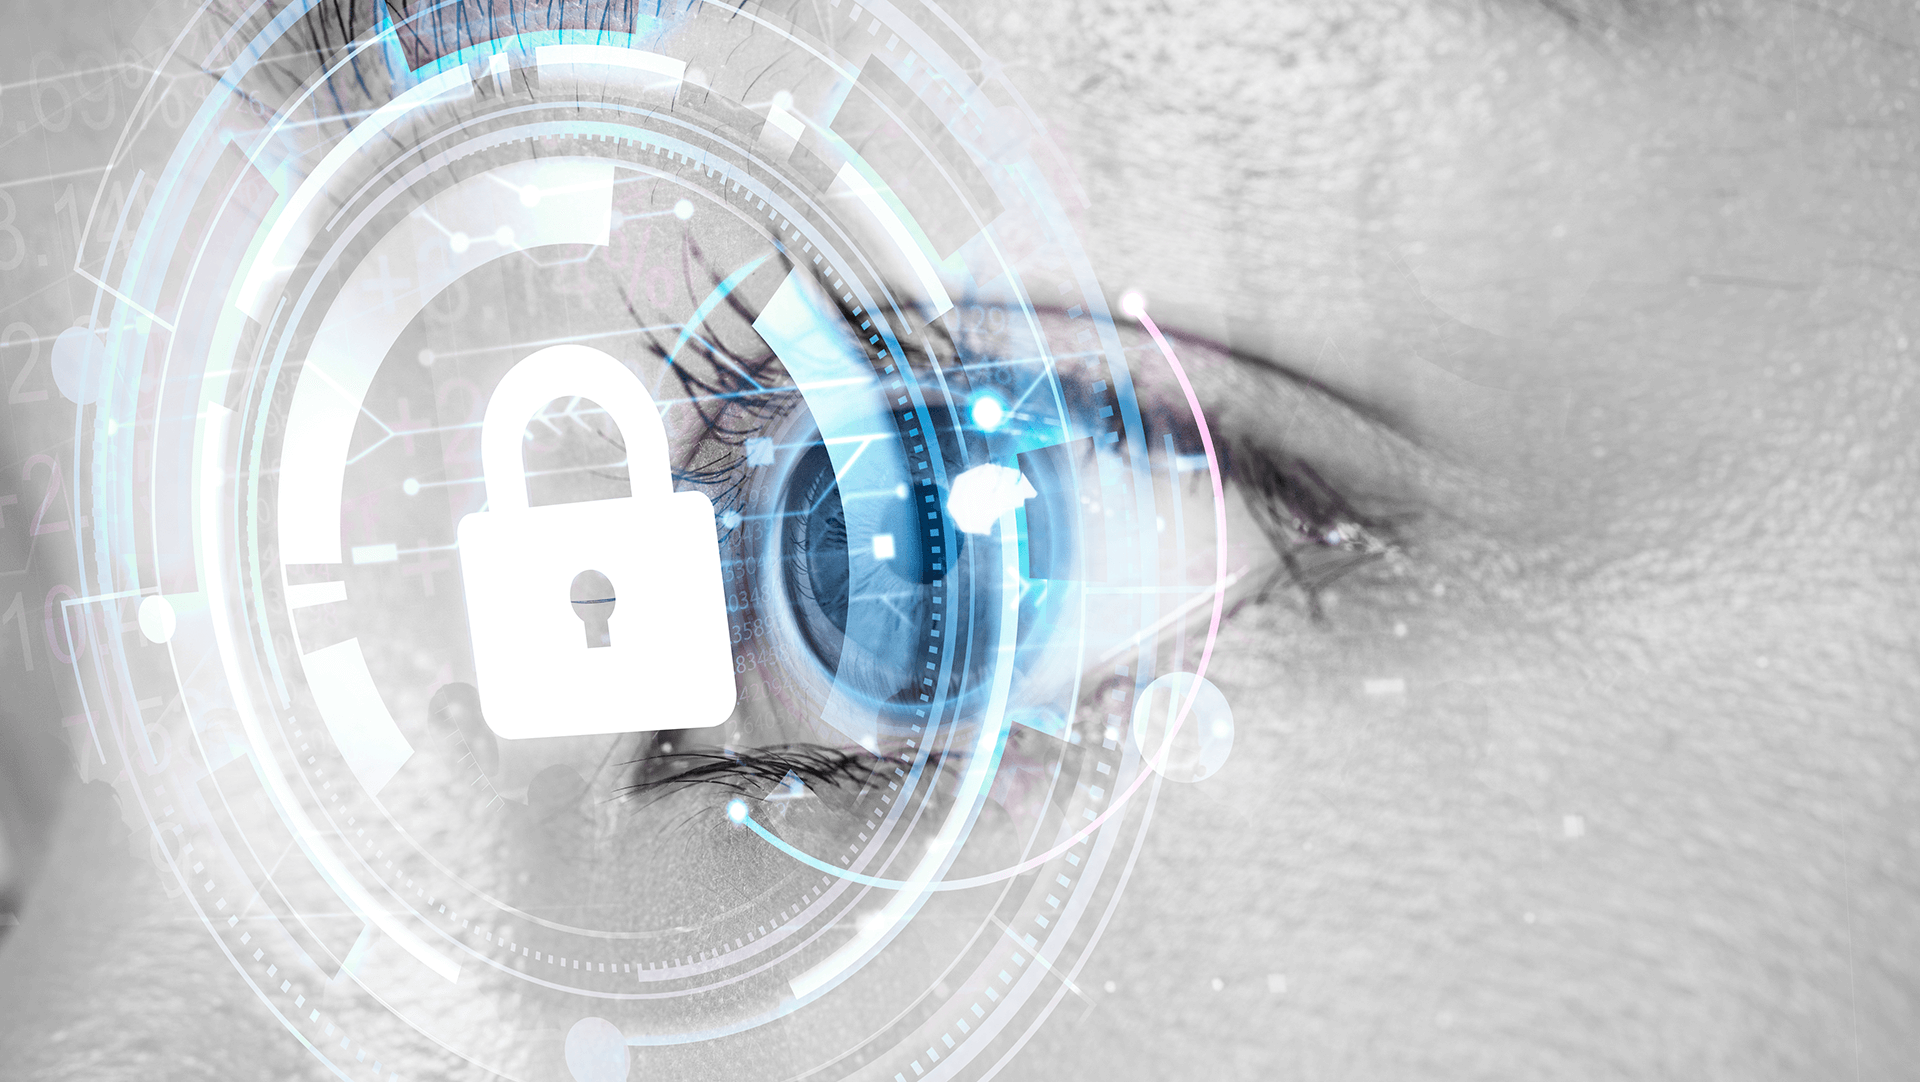 A close-up of a human eye overlayed with digital graphics symbolizing cybersecurity and data protection.